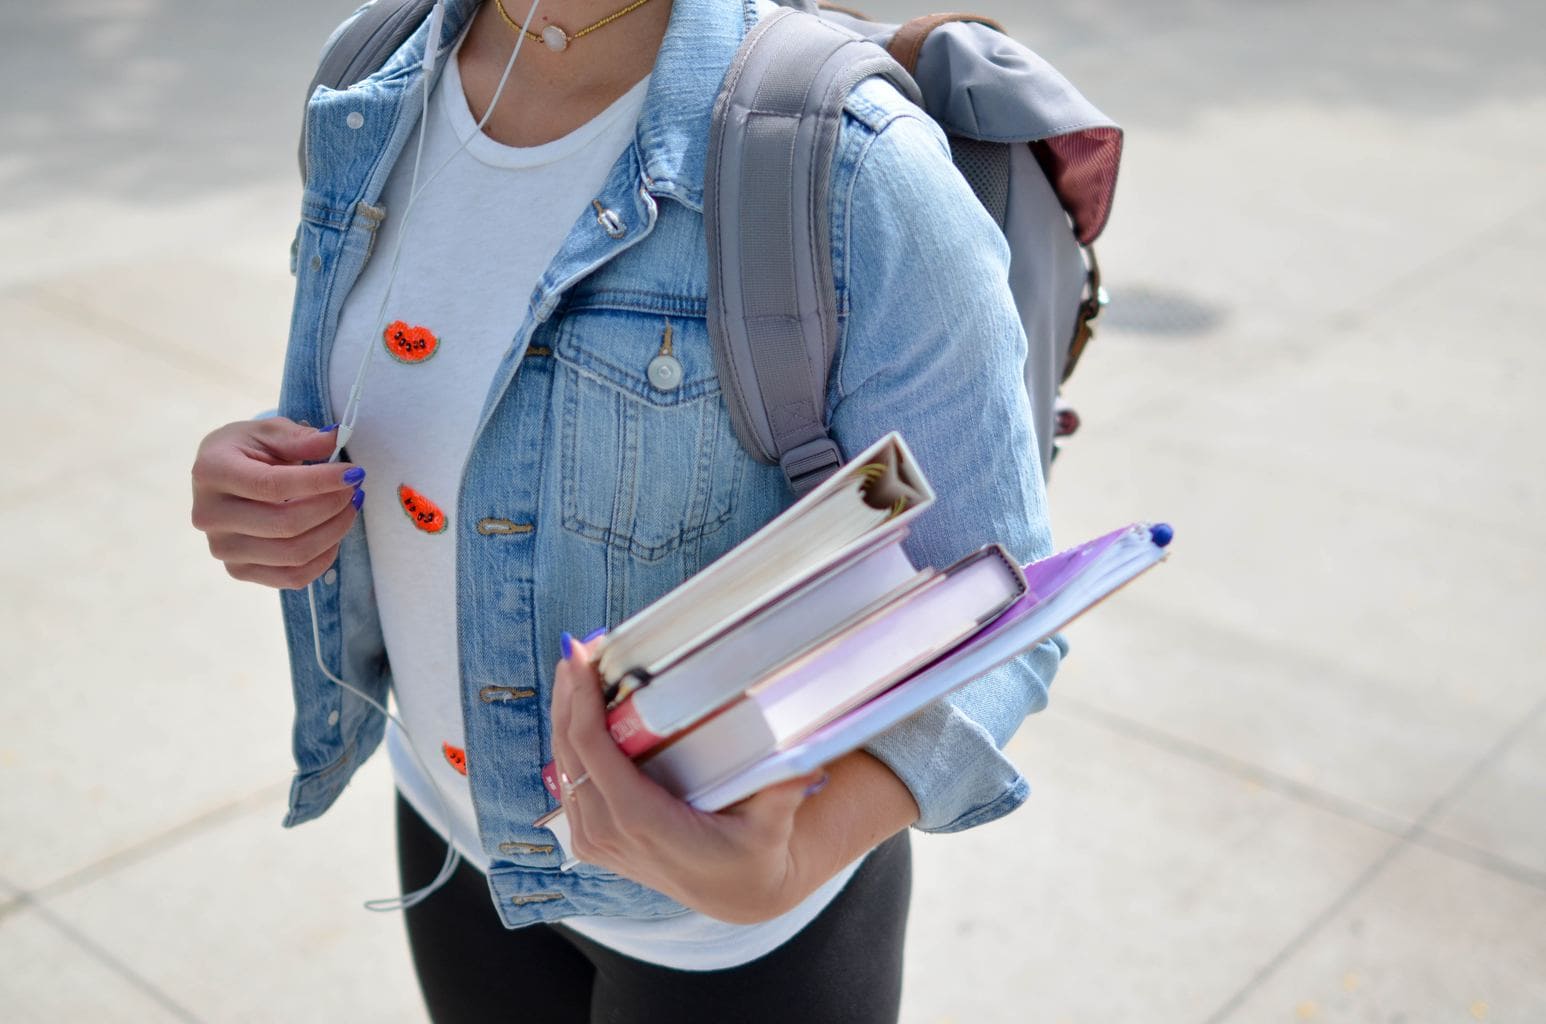 What to Wear to a College Class: Outfit Ideas & Tips - College Fashion